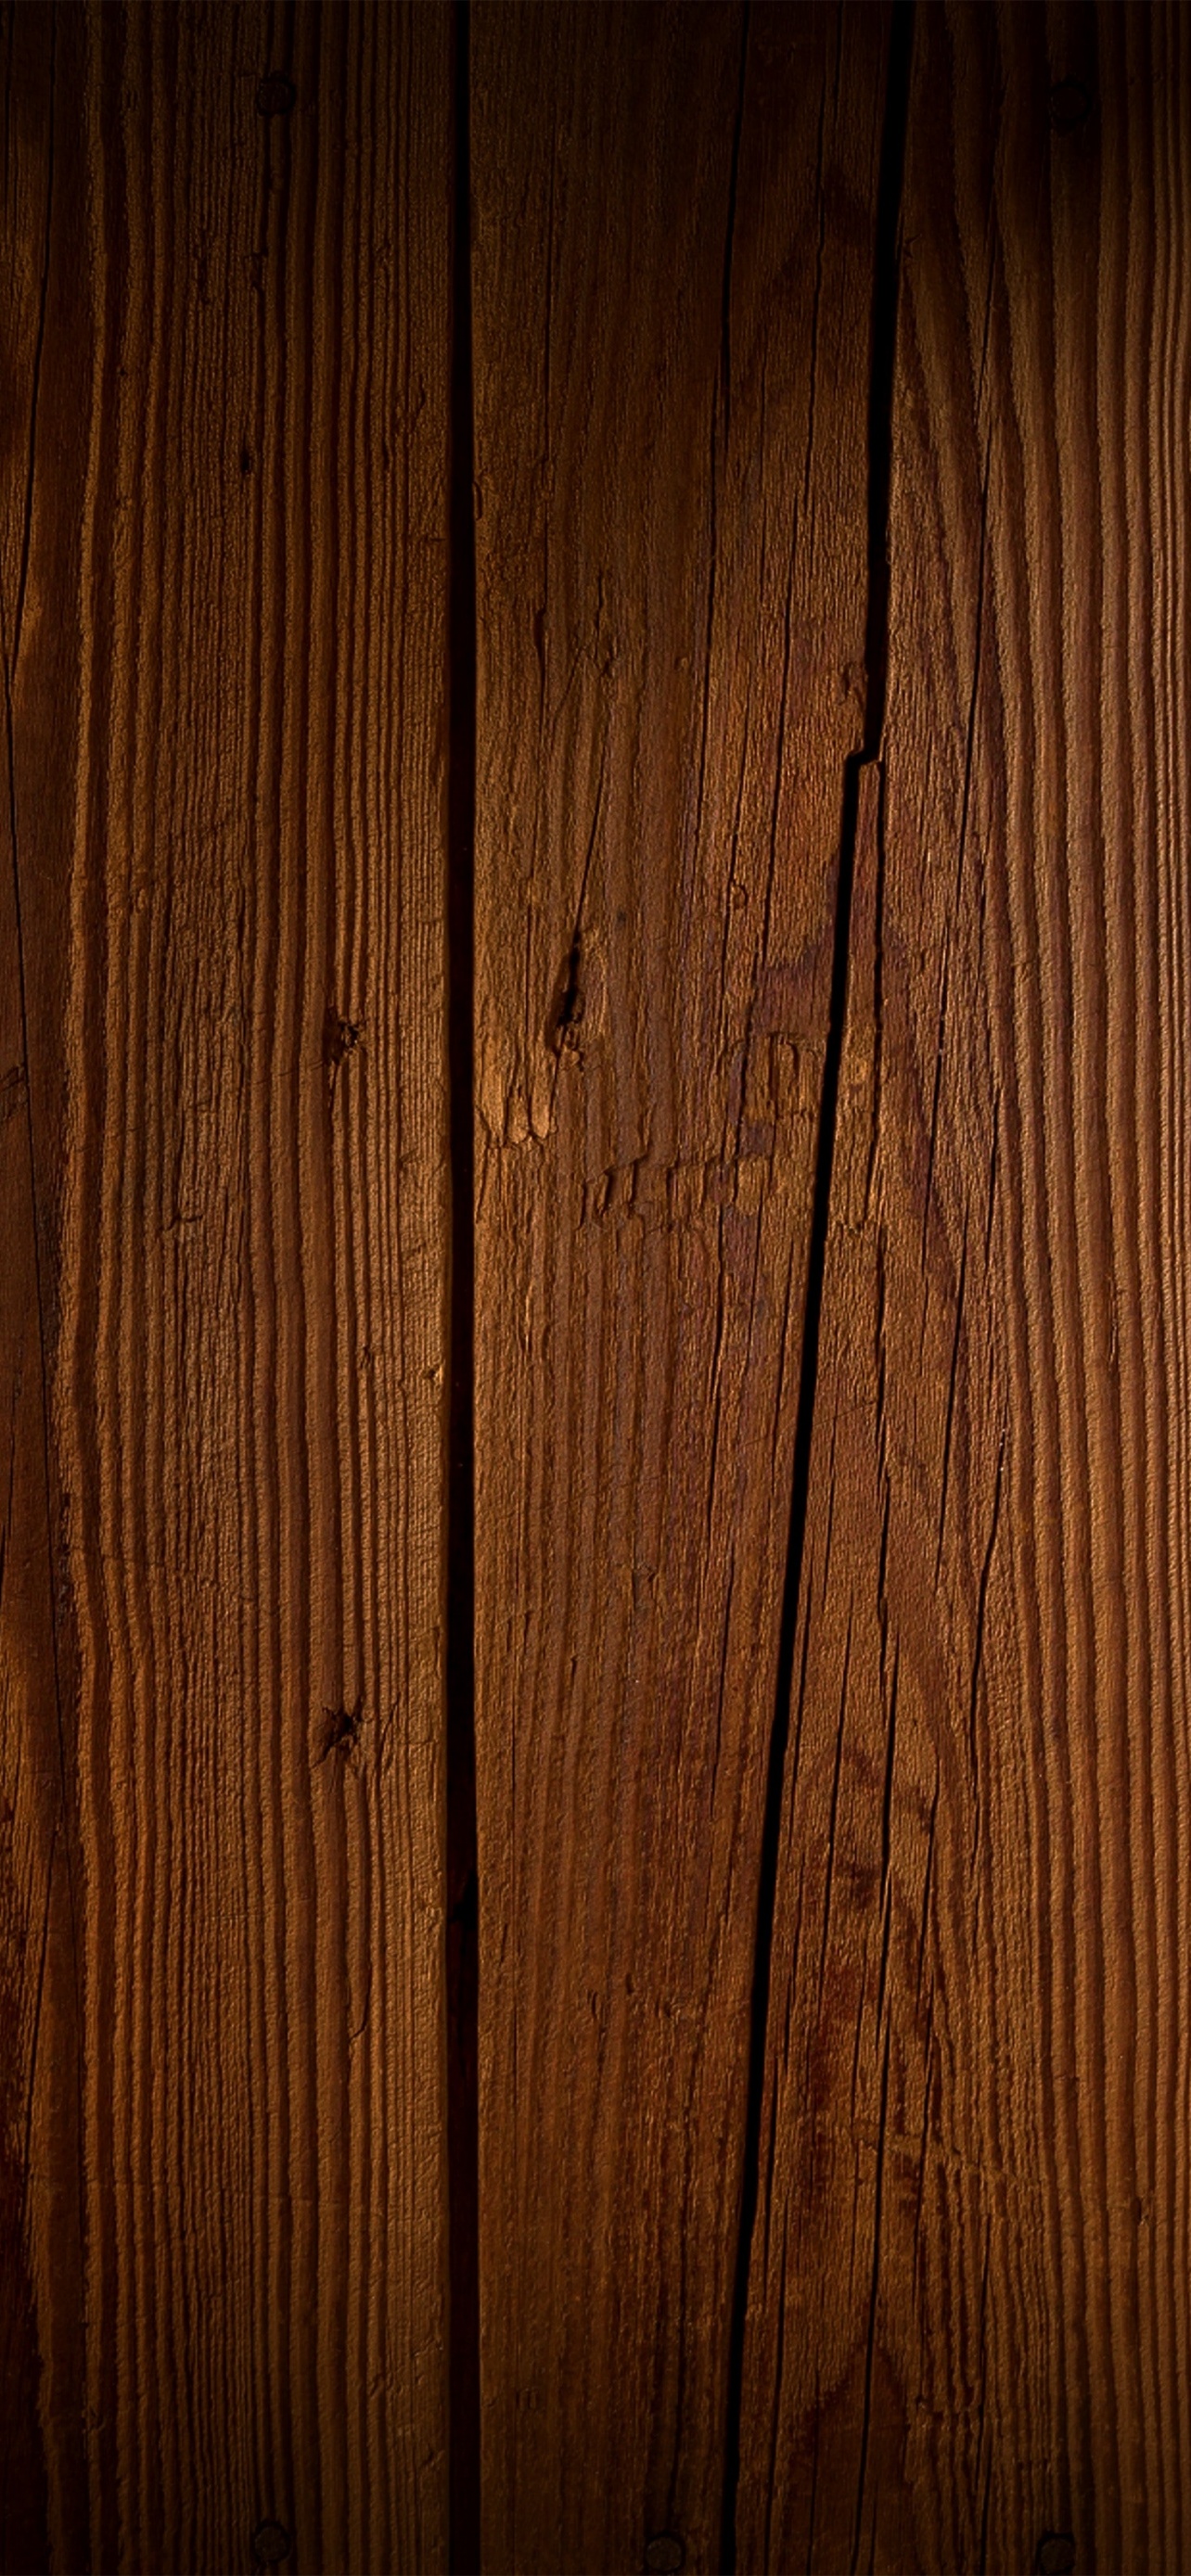 Discover 55+ wood wallpaper iphone latest - in.cdgdbentre